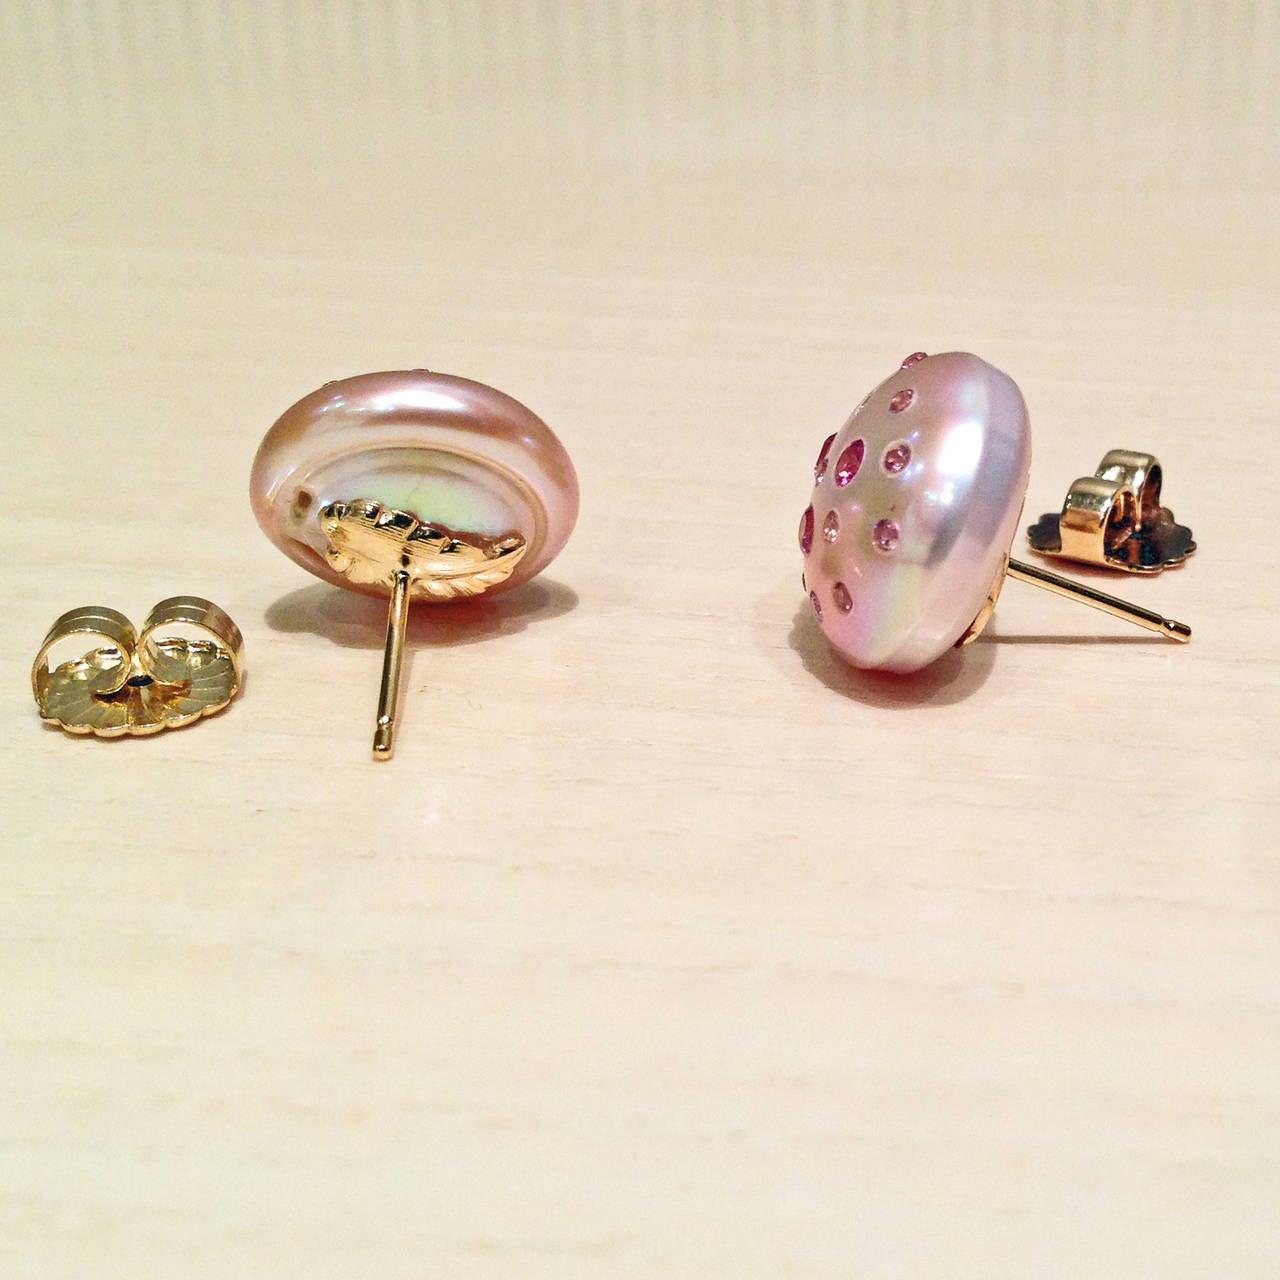 Artist Russell Trusso Pink Diamond-Embedded Pink Freshwater Button Pearl Earrings